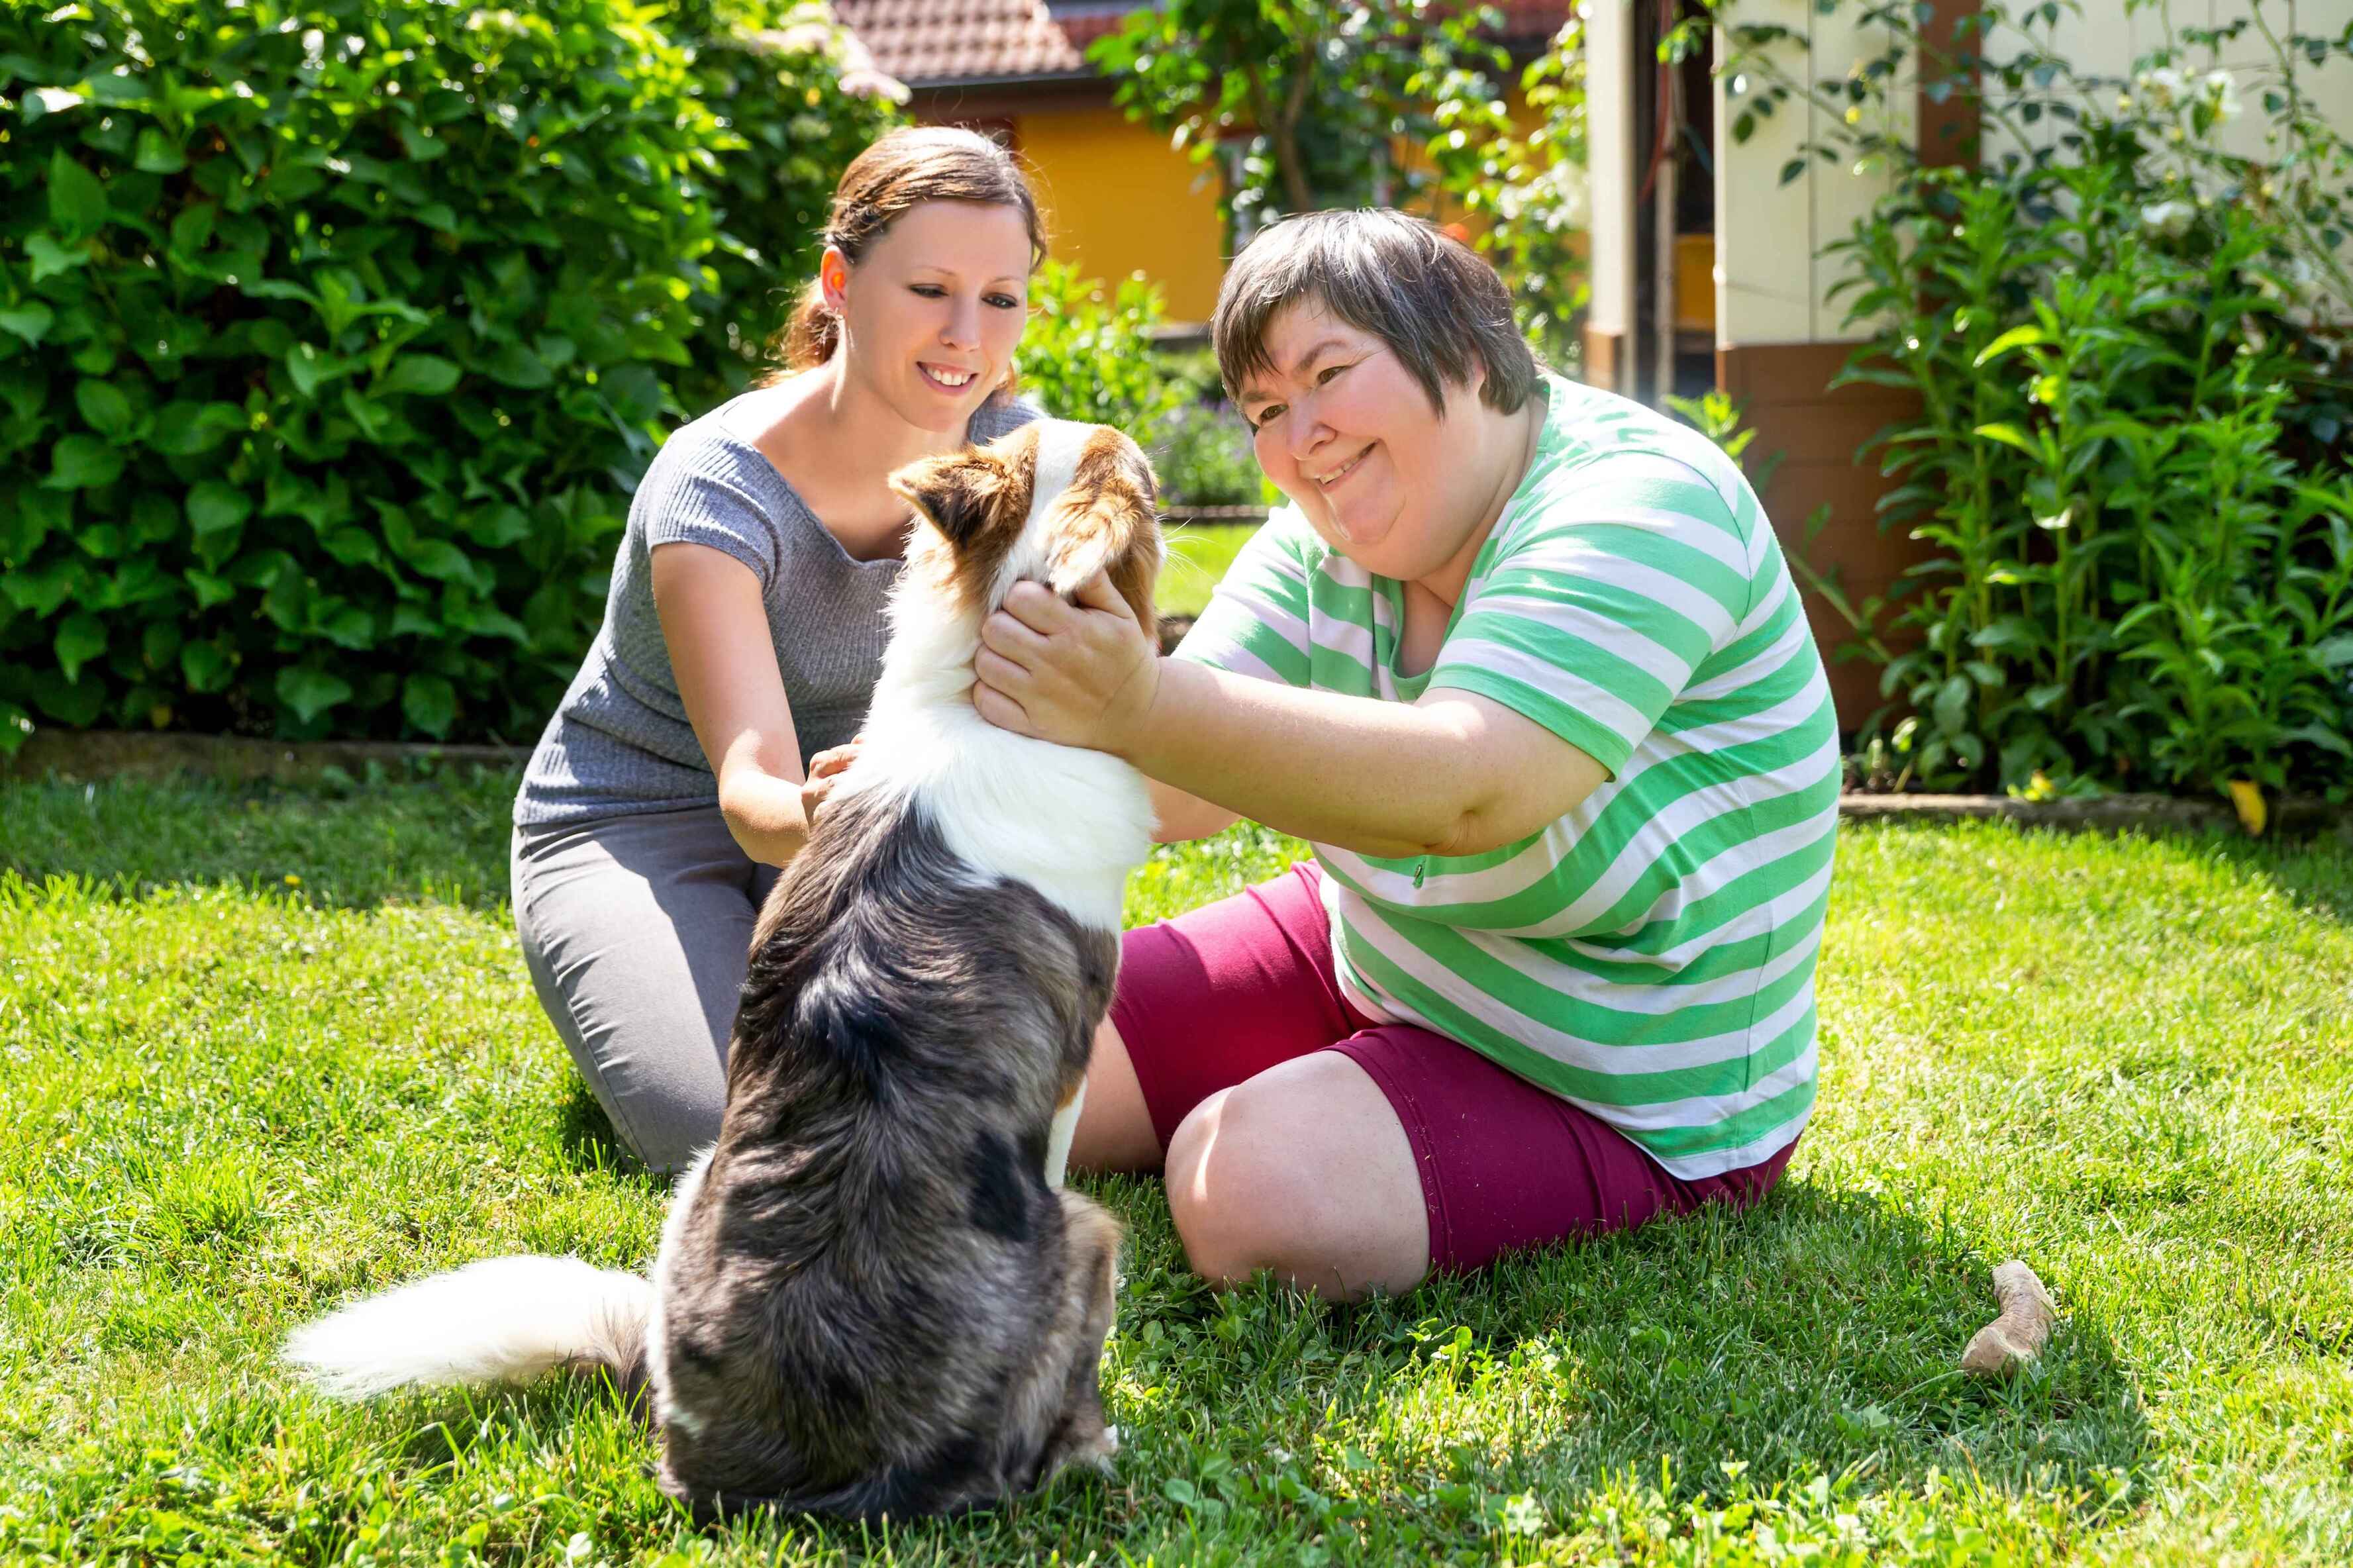 Two women, one with a disability, play with a dog on a lawn